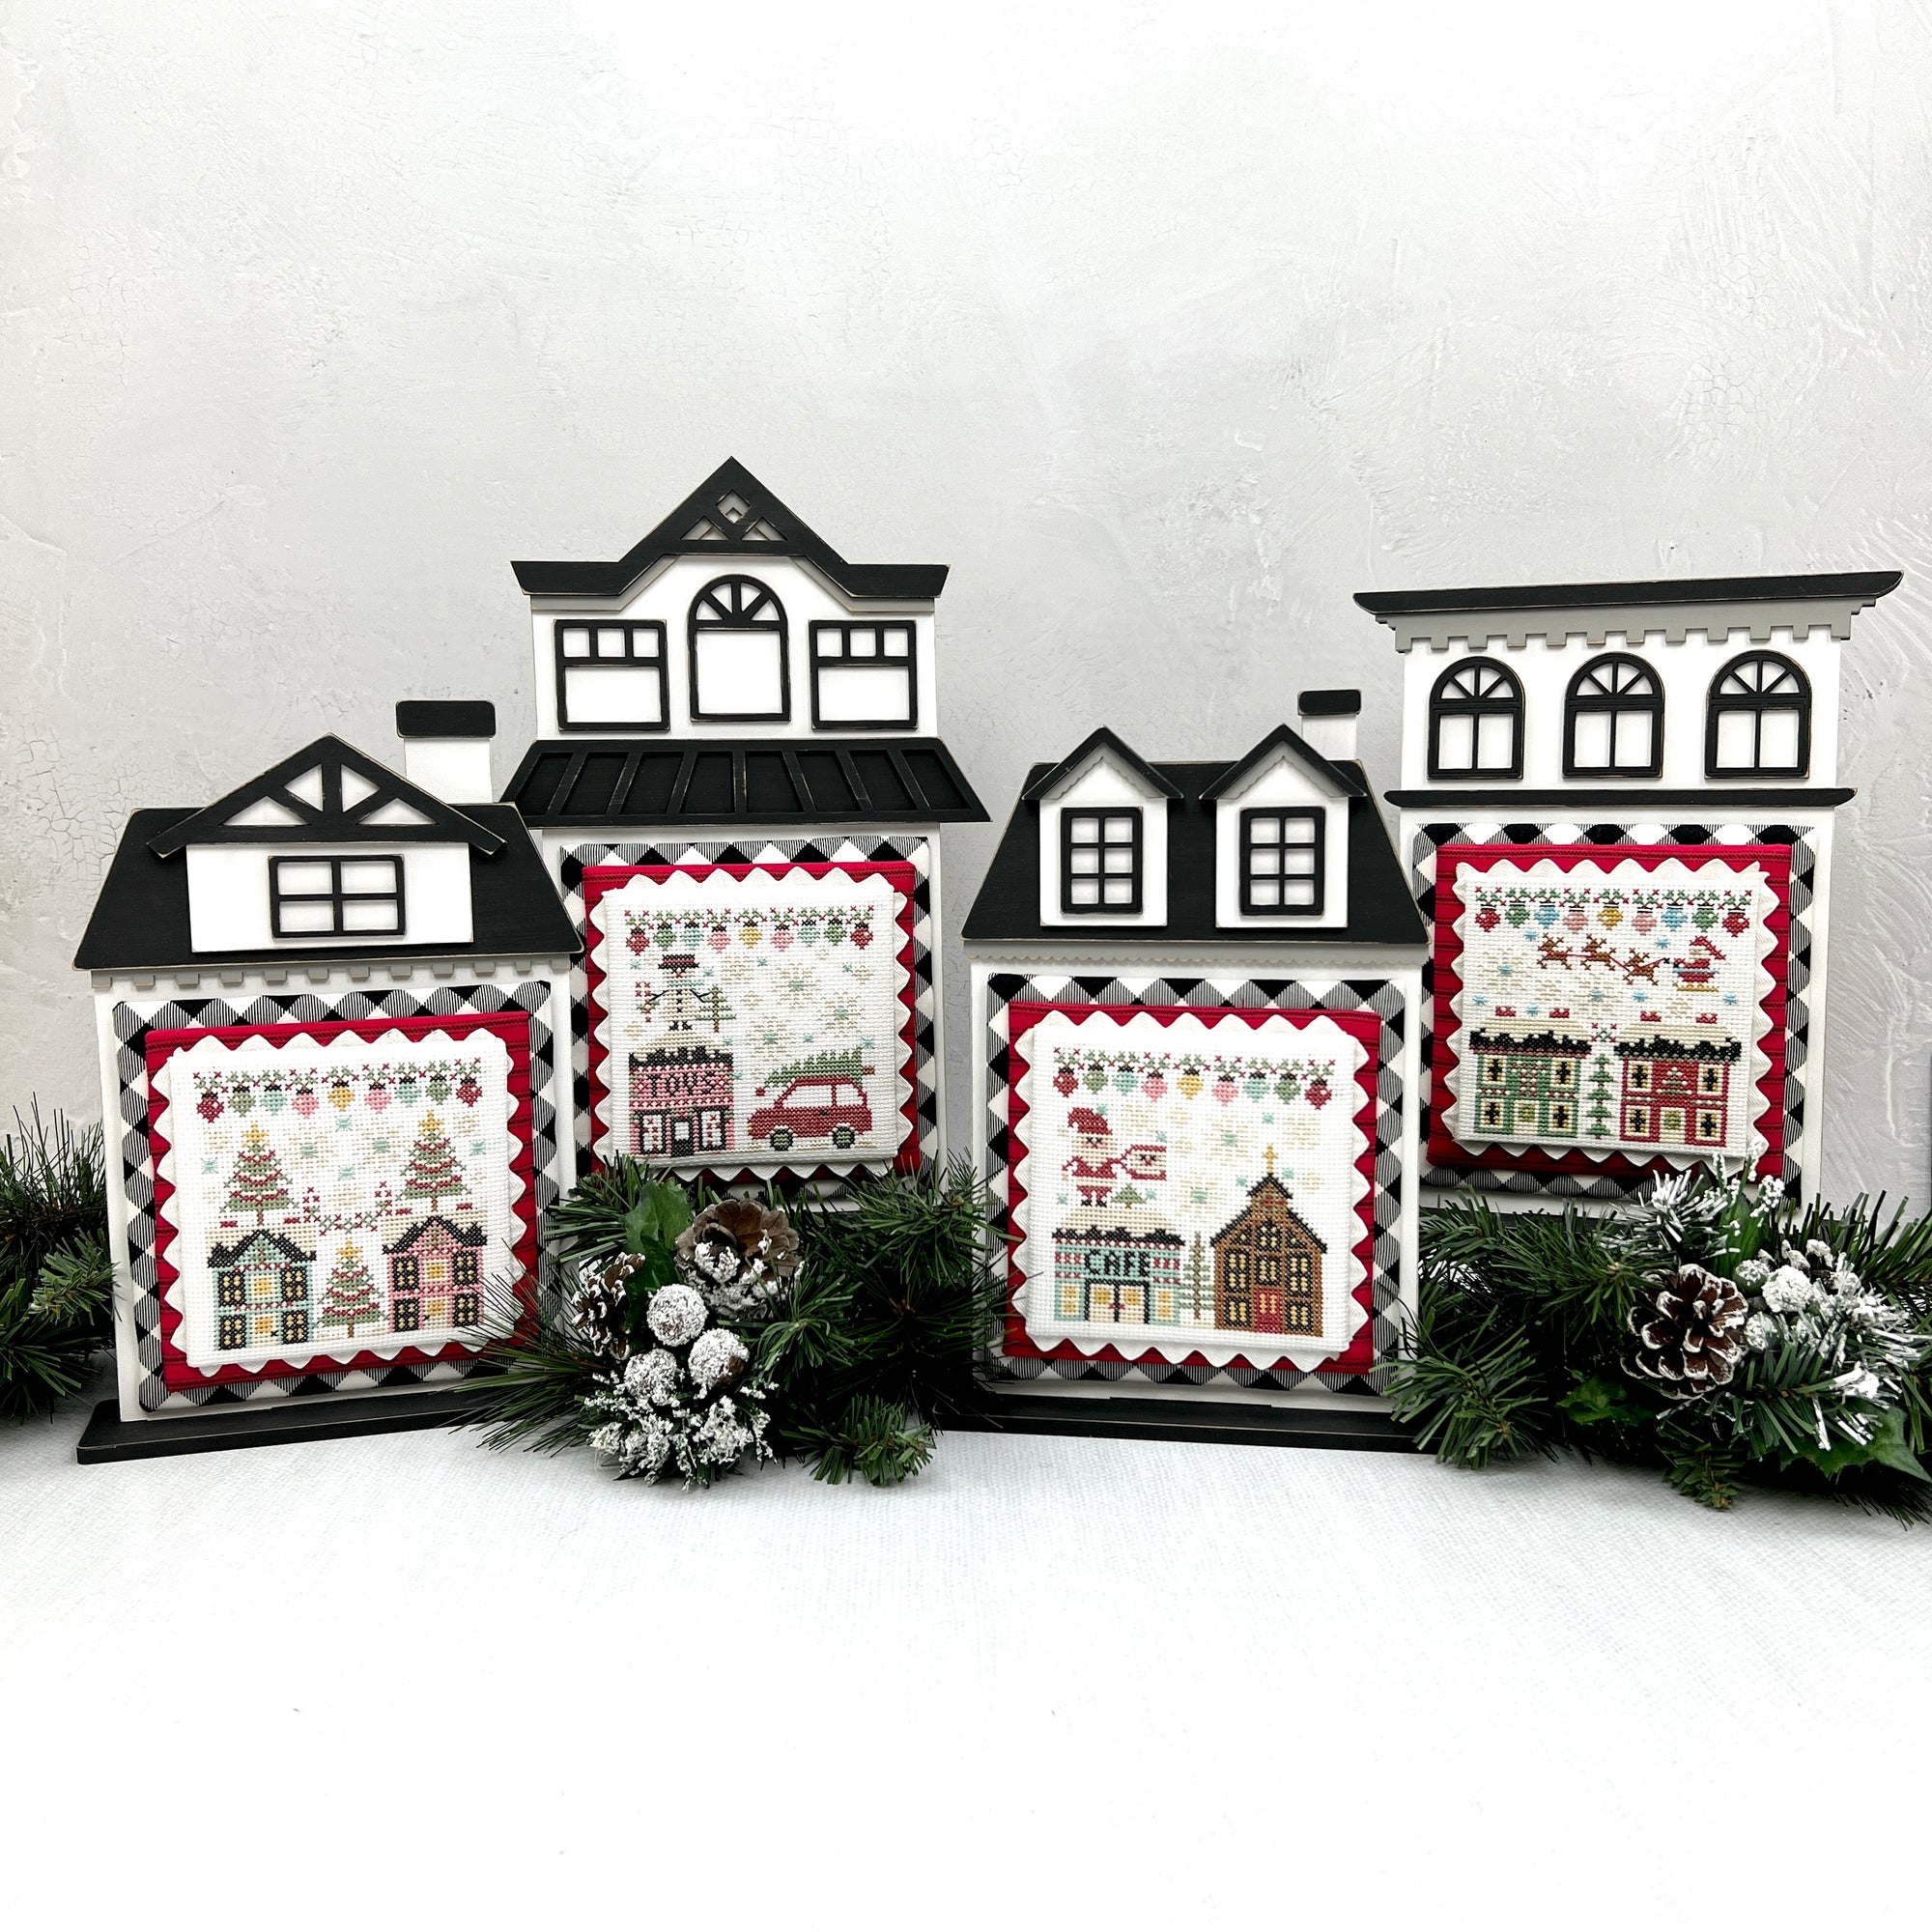 Stitching with the Housewives City Christmas cross stitch displayed on wood city houses